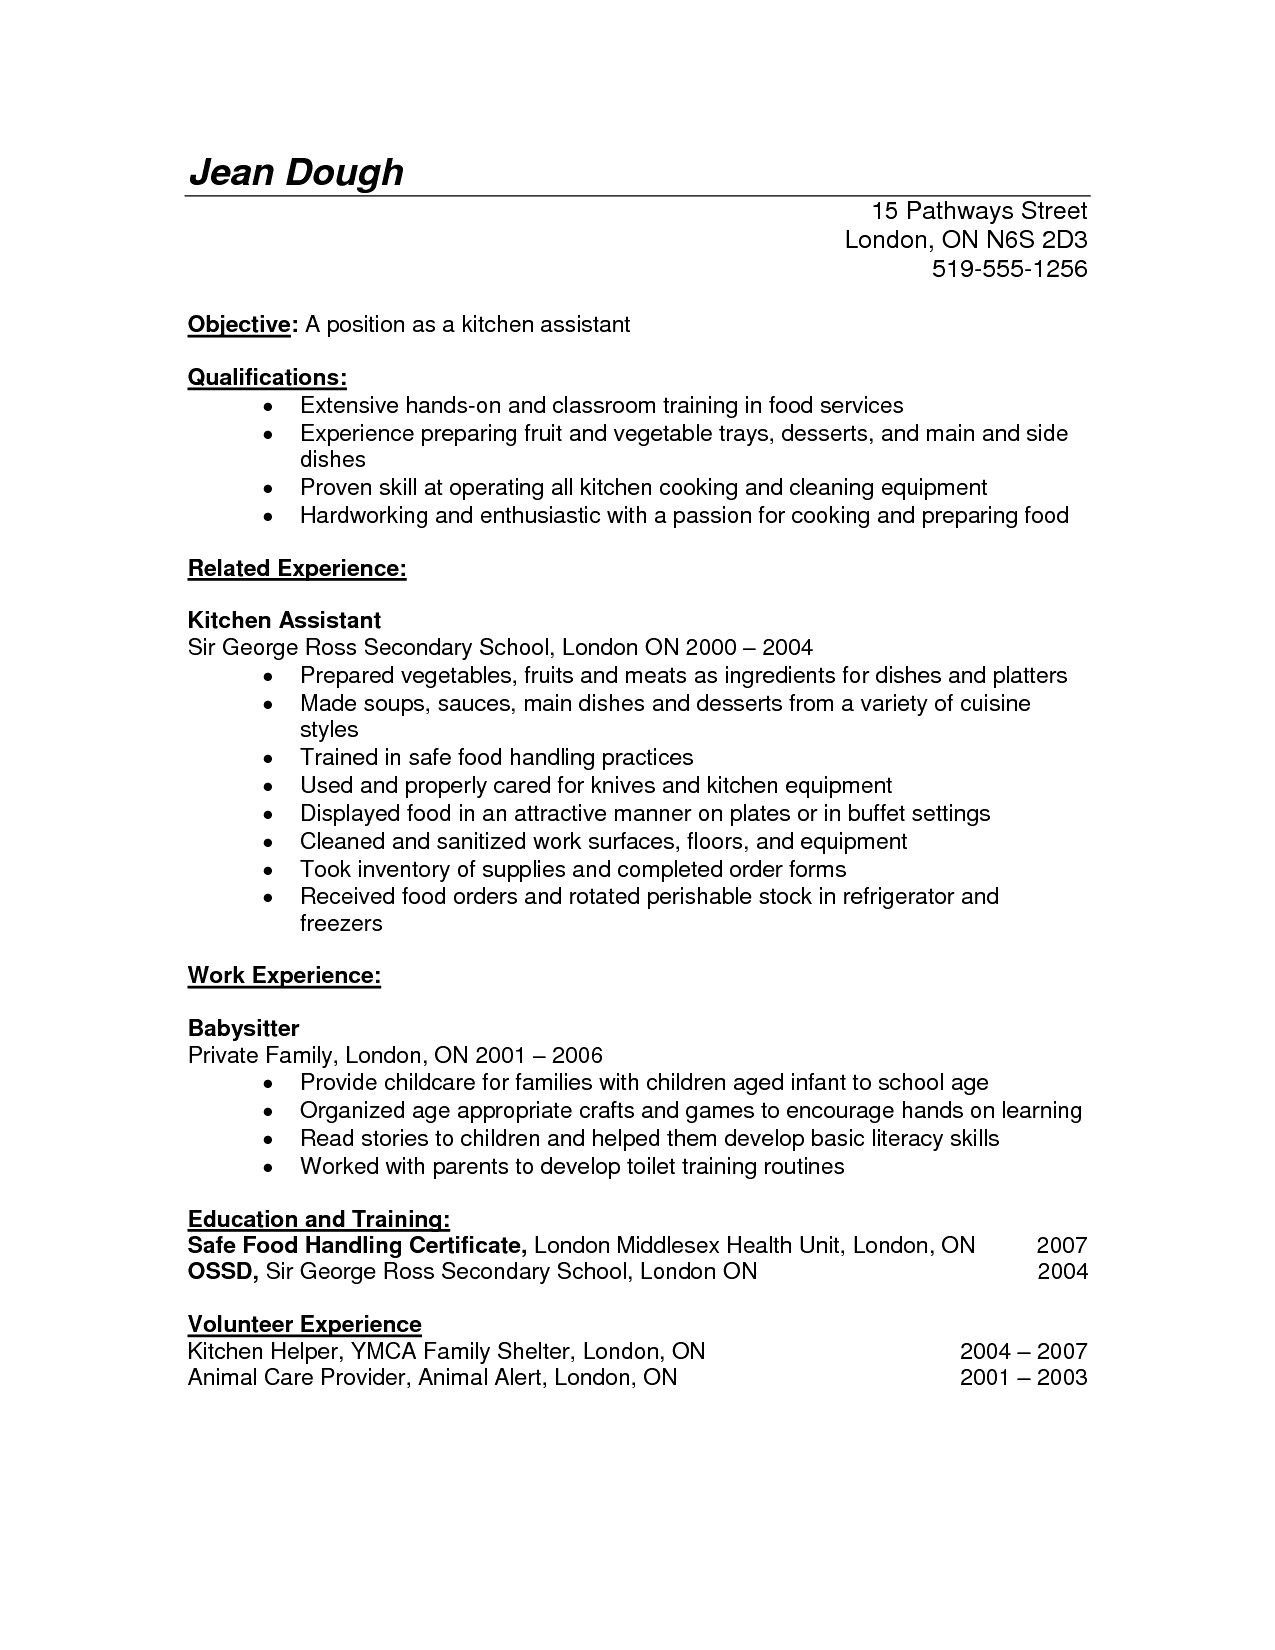 Resume Templates for Kitchen Helper - TEMPLATES EXAMPLE | TEMPLATES EXAMPLE